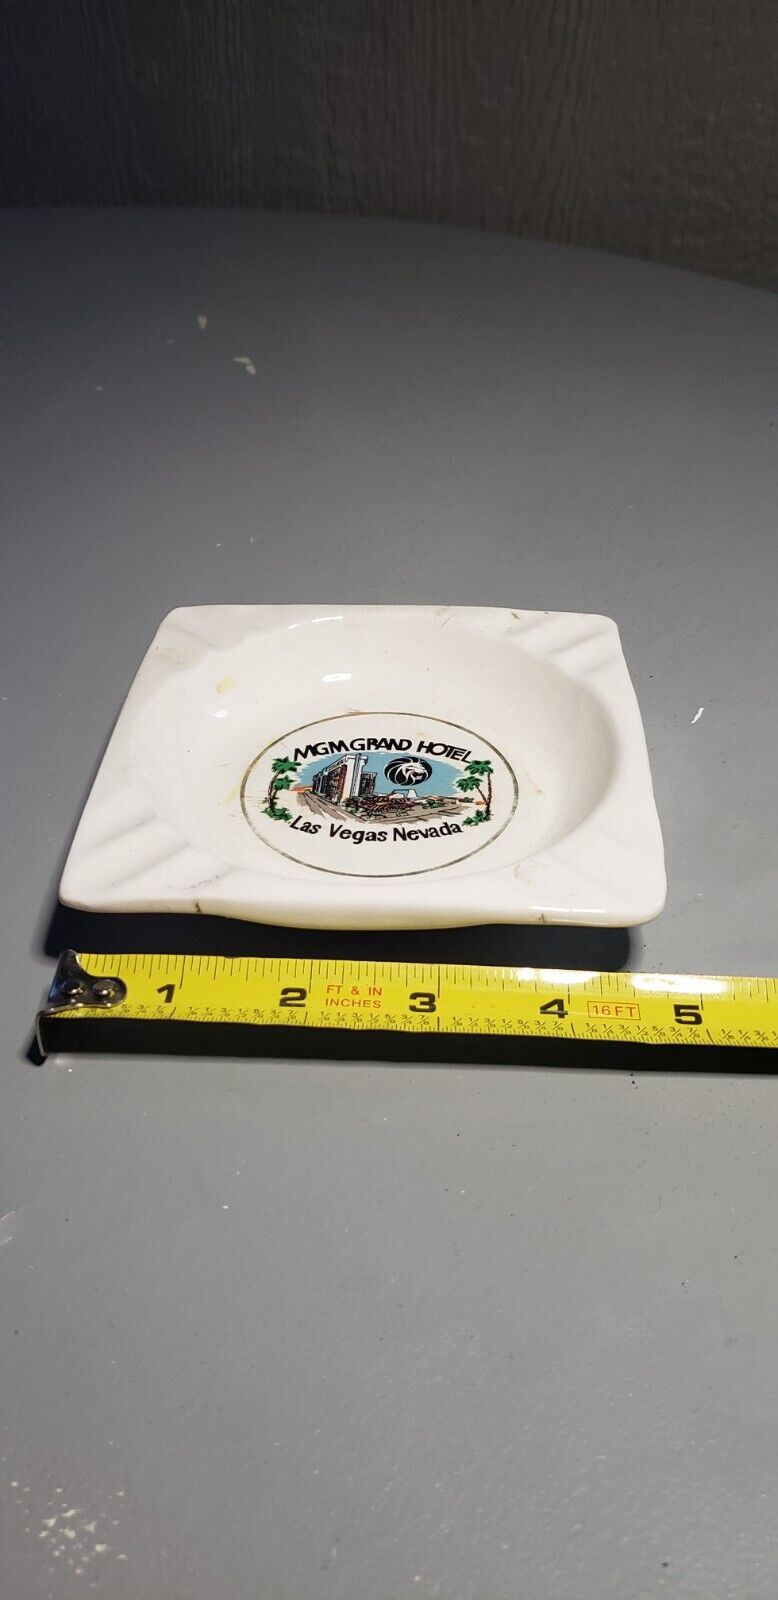 Vintage advertising MGM GRAND HOTEL ashtray painted label